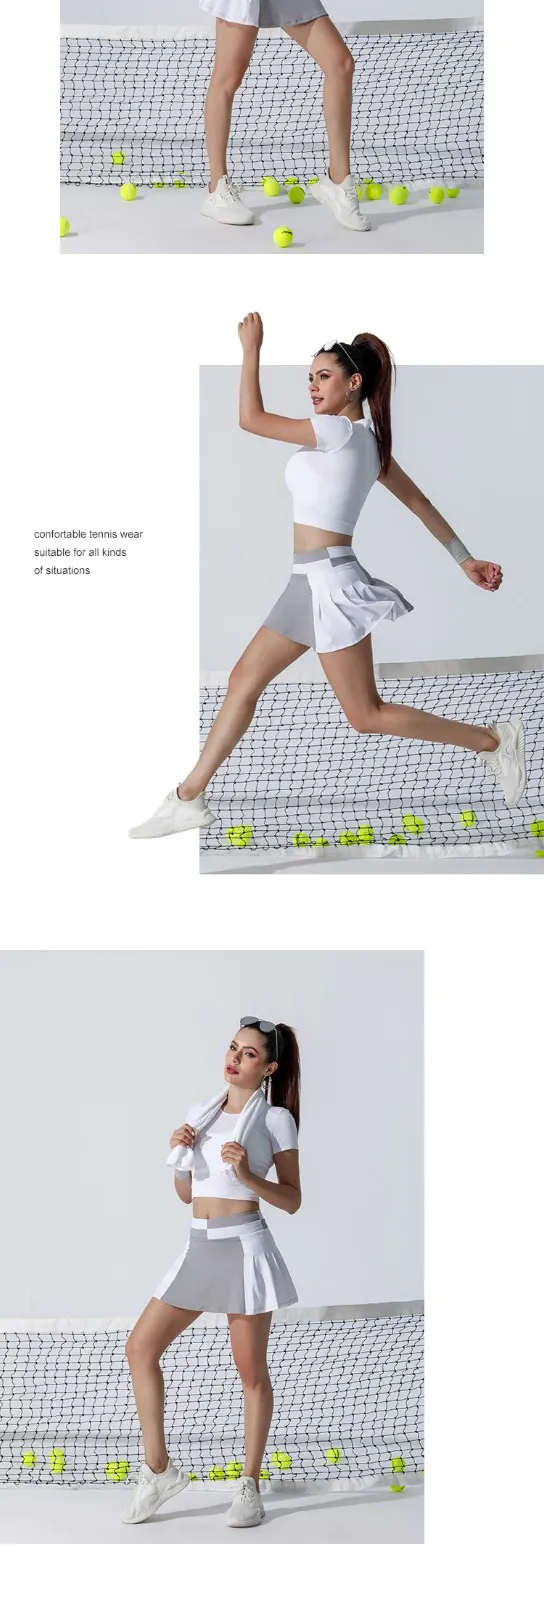 custom woman tennis clothes solutions for sport